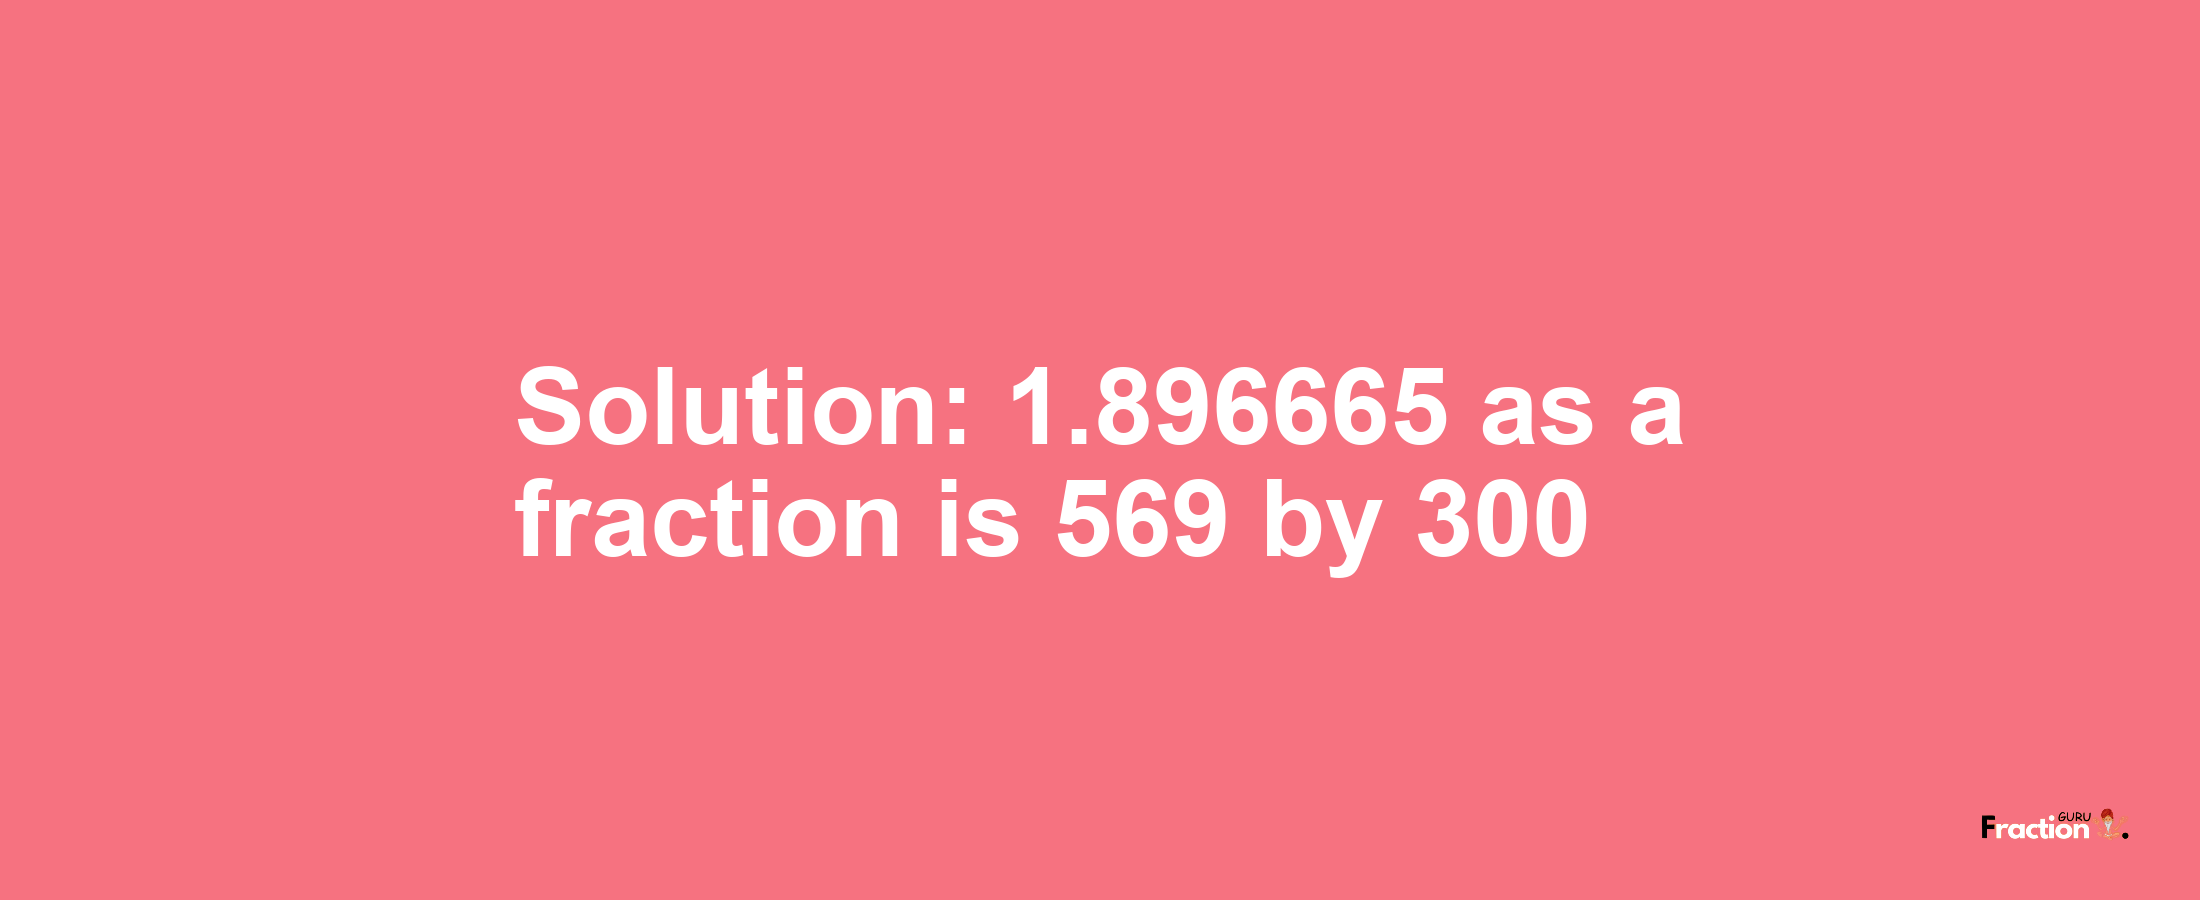 Solution:1.896665 as a fraction is 569/300